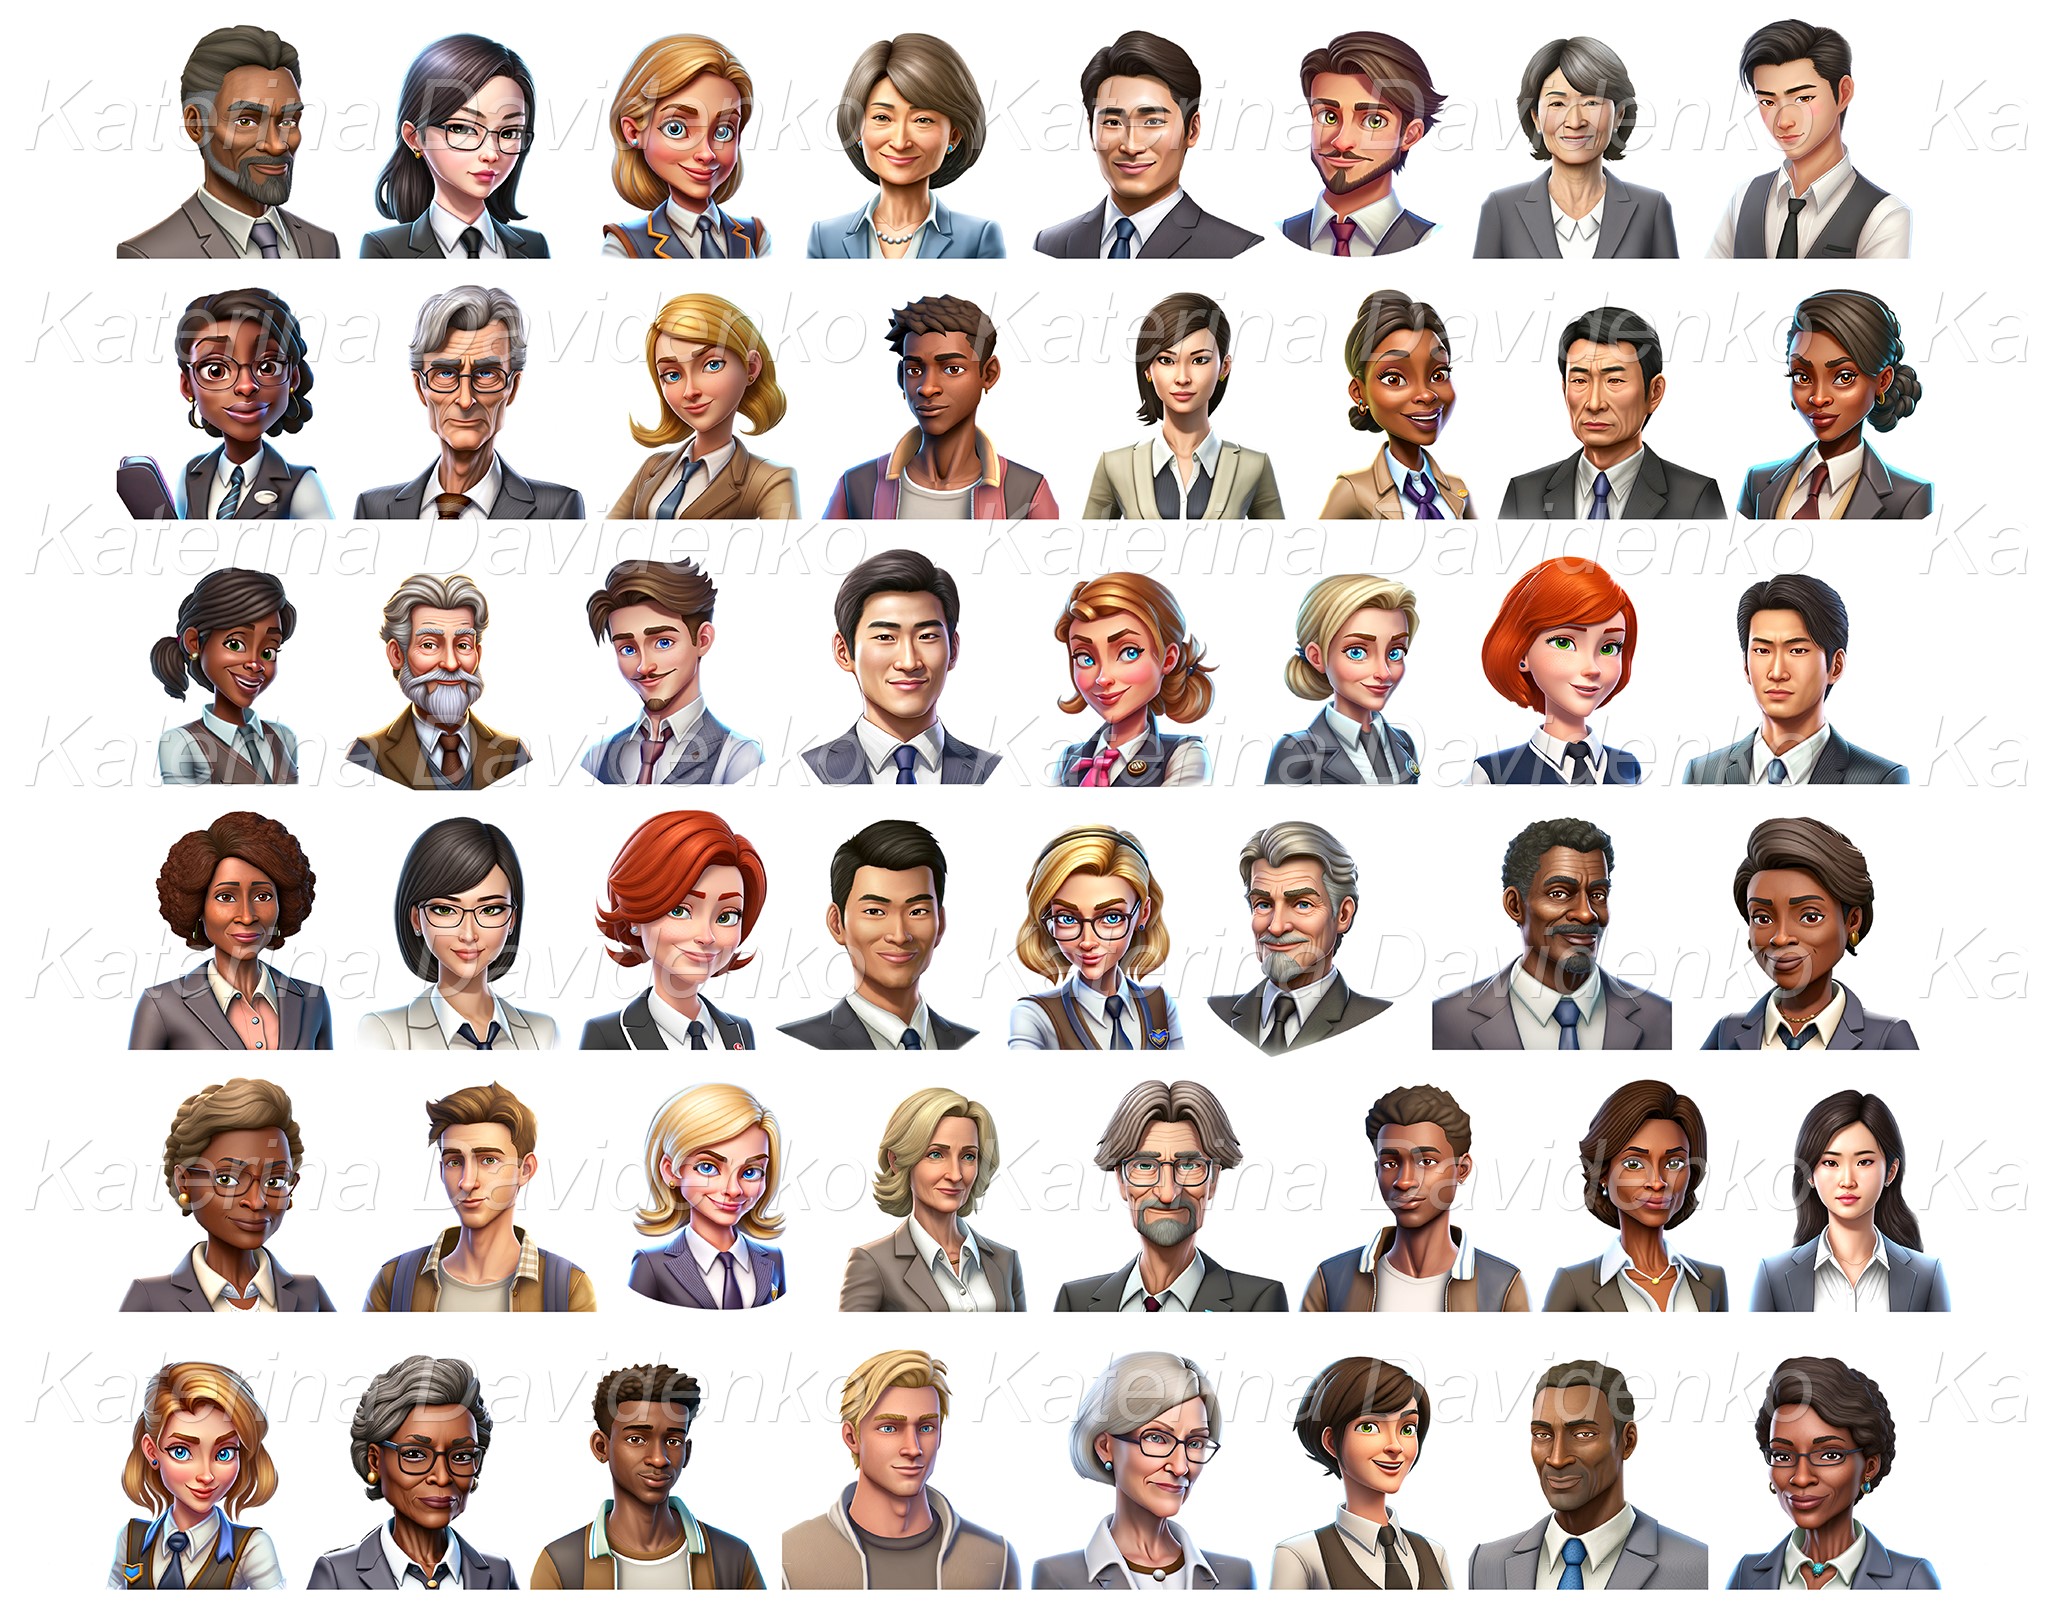 Icons set with cartoon people faces, isolated avatars of multinational people, office workers, portraits of realistic characters